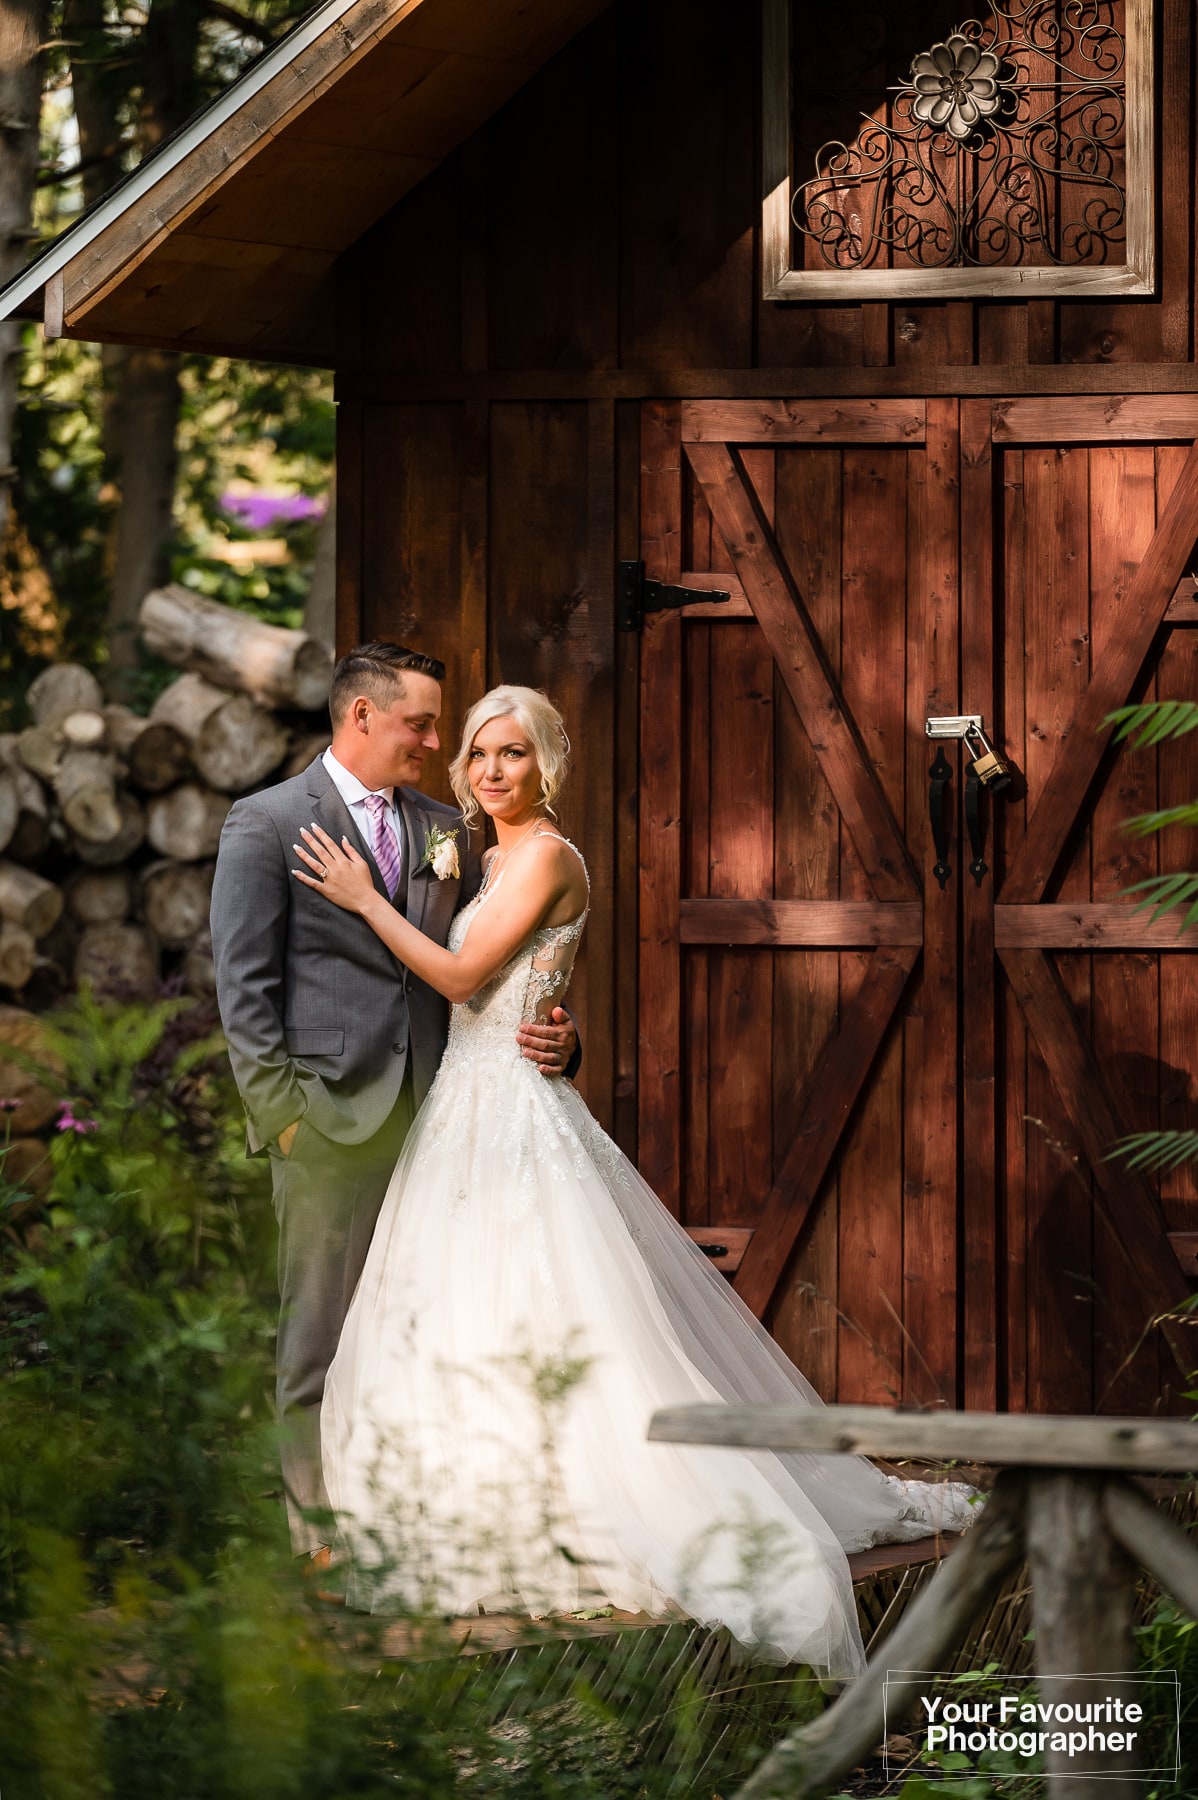 Formal photo of bride and groom at rustic location